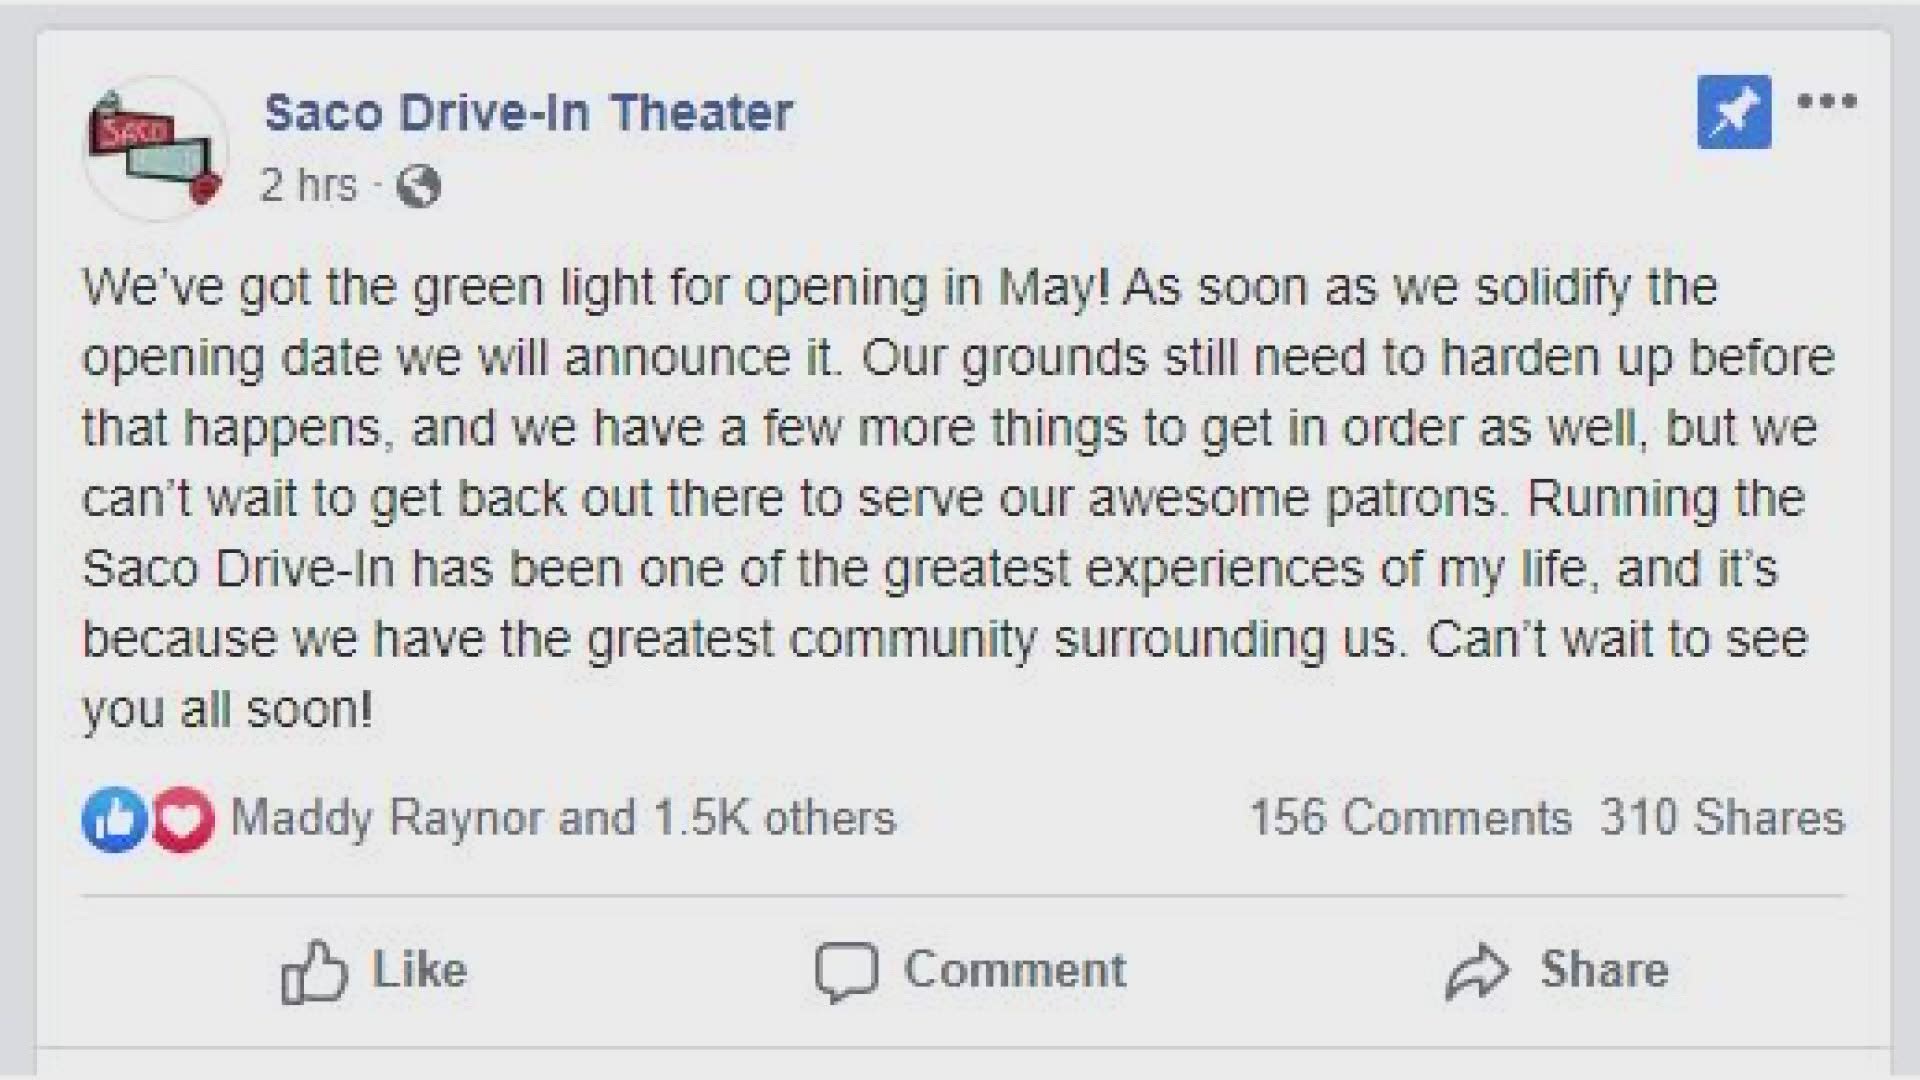 The Saco Drive-In announced on their Facebook page that they will be opening in May once the ground hardens up to support cars and people.